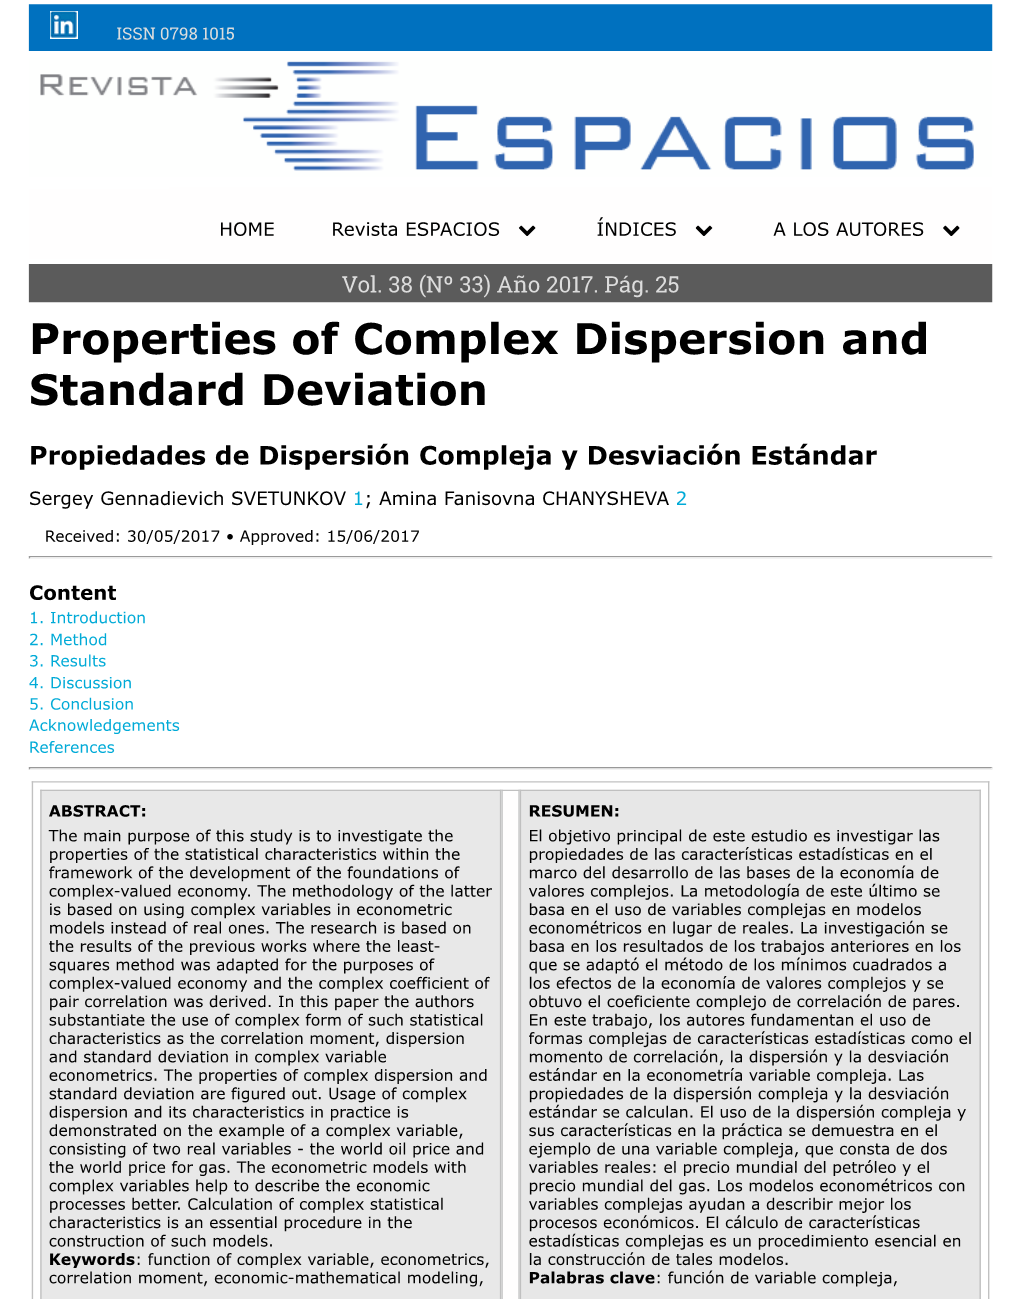 Properties of Complex Dispersion and Standard Deviation